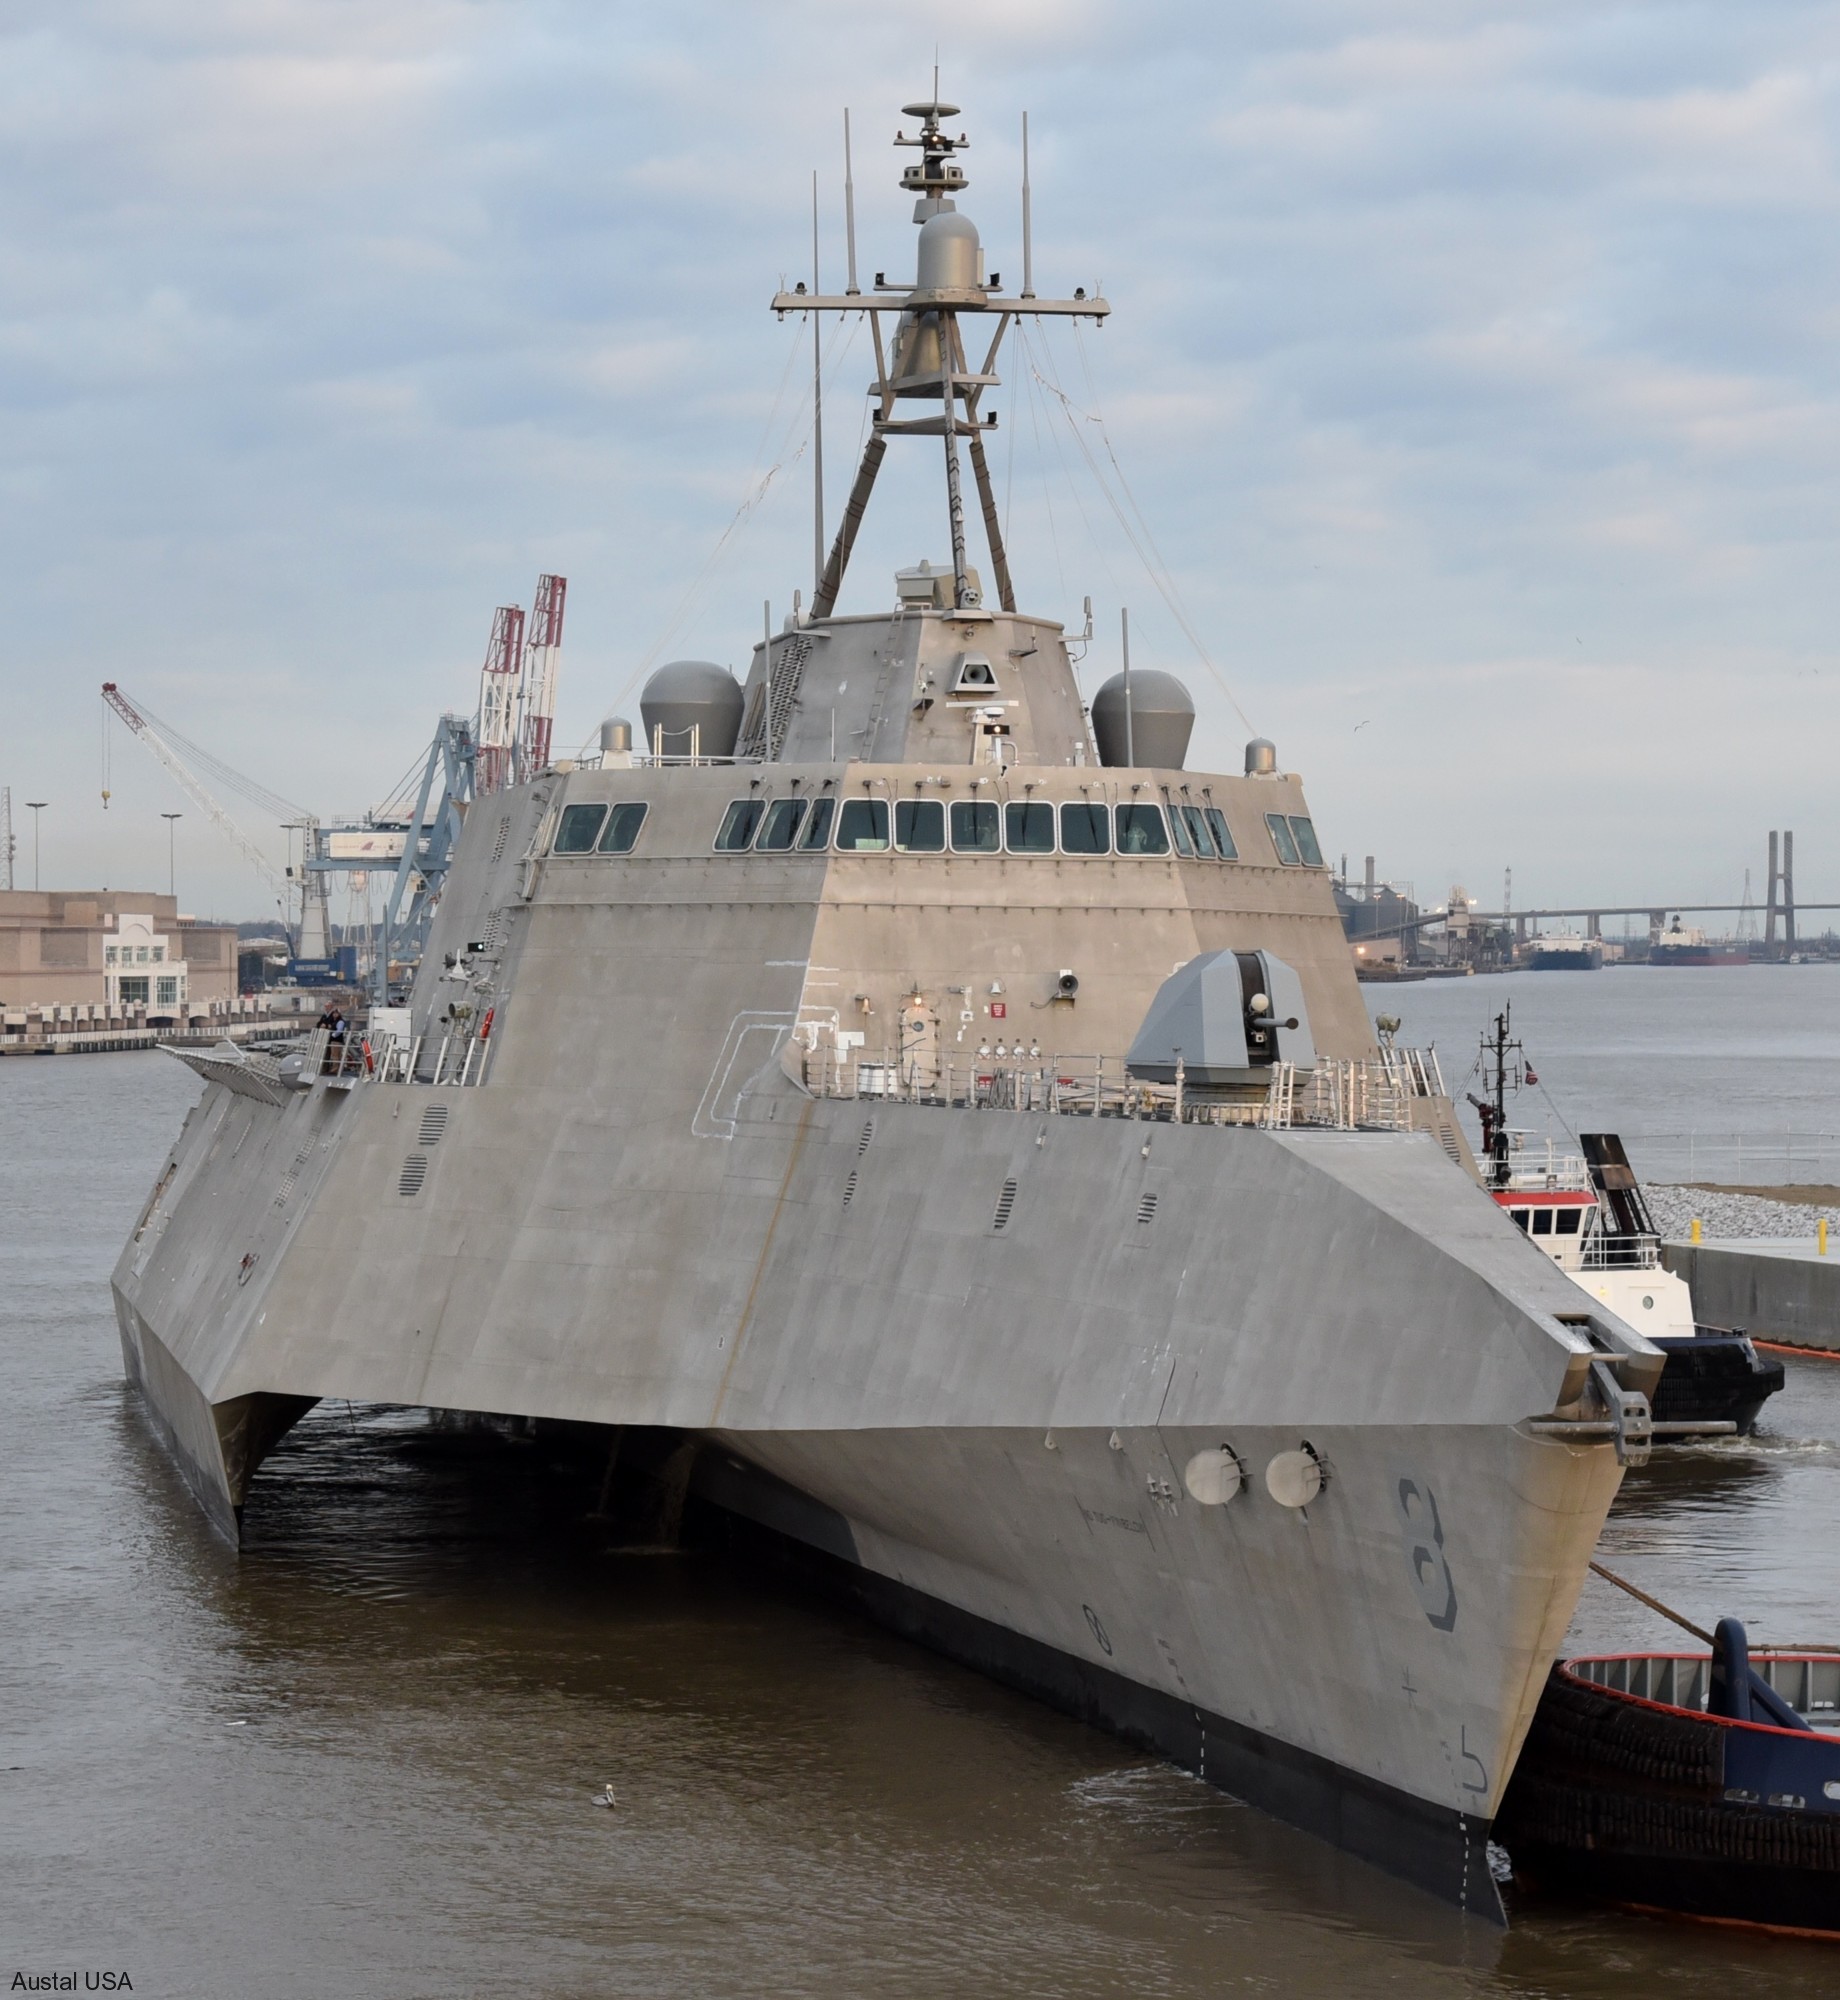 lcs-8 uss montgomery independence class littoral combat ship us navy 64